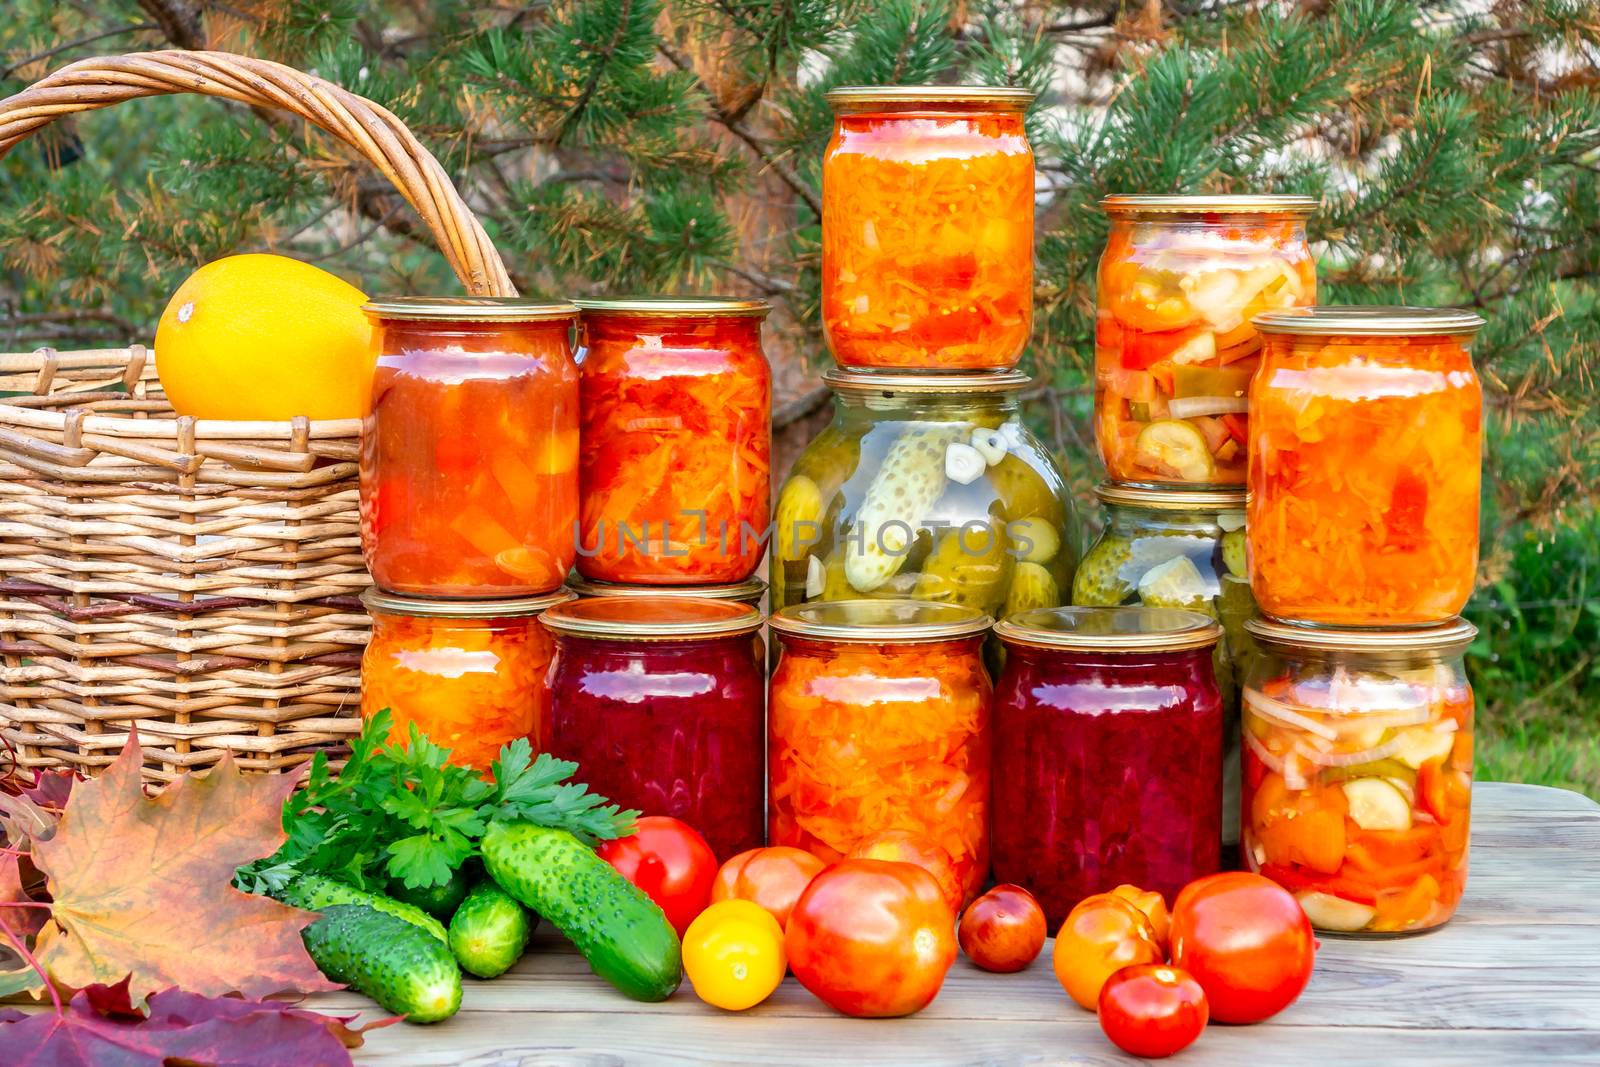 Several homemade jars of canned vegetables and fresh vegetables on a wooden table - image by galsand